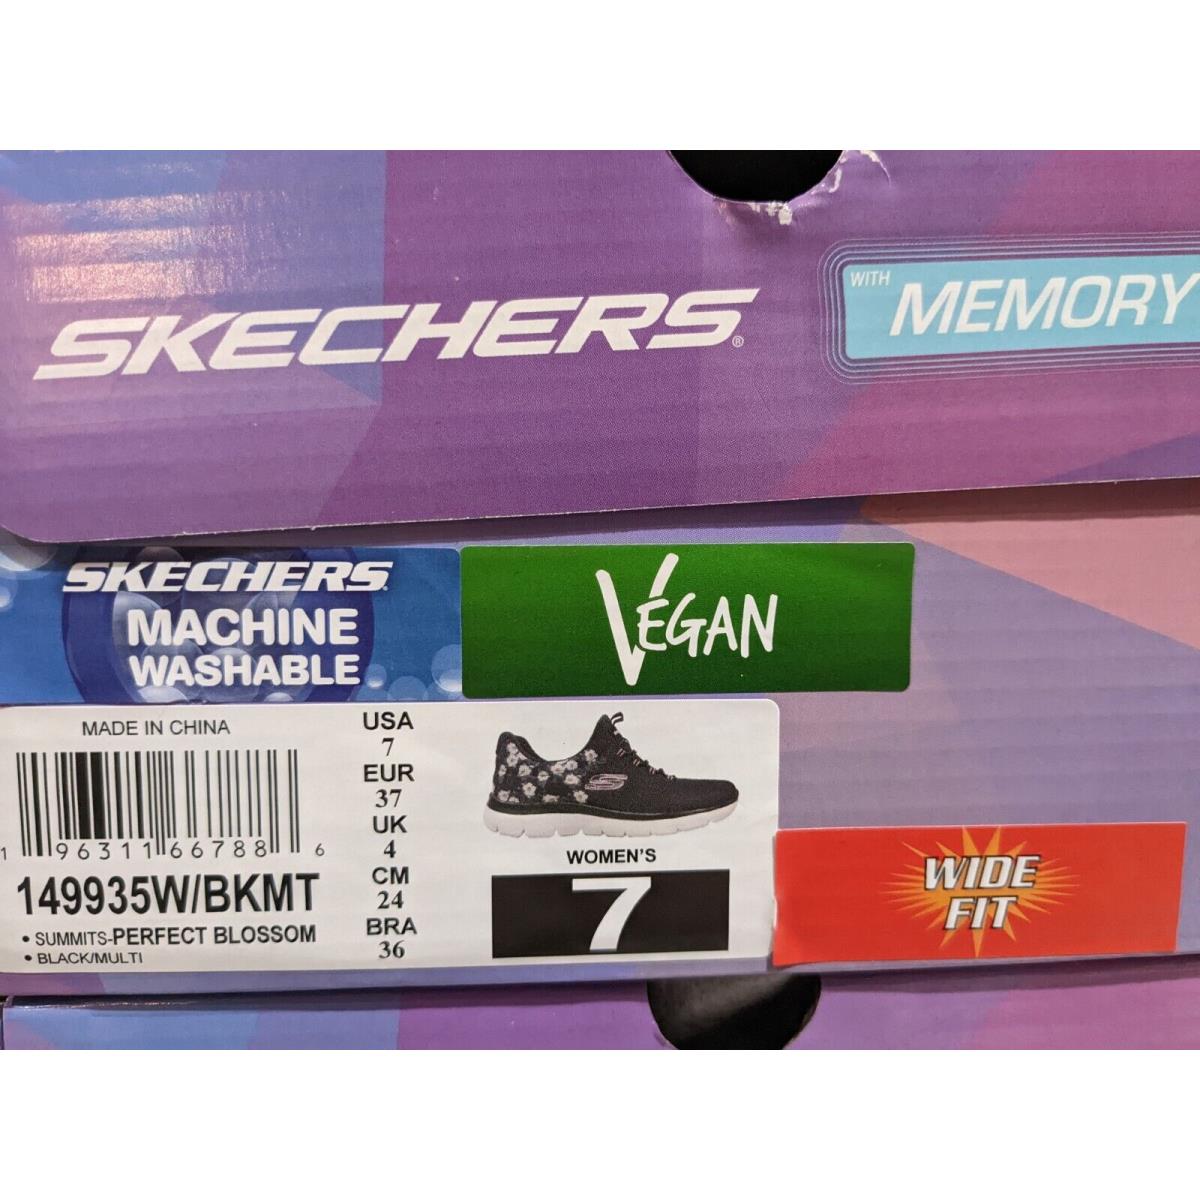 Skechers shoes Summits Perfect Blossom - Black 7